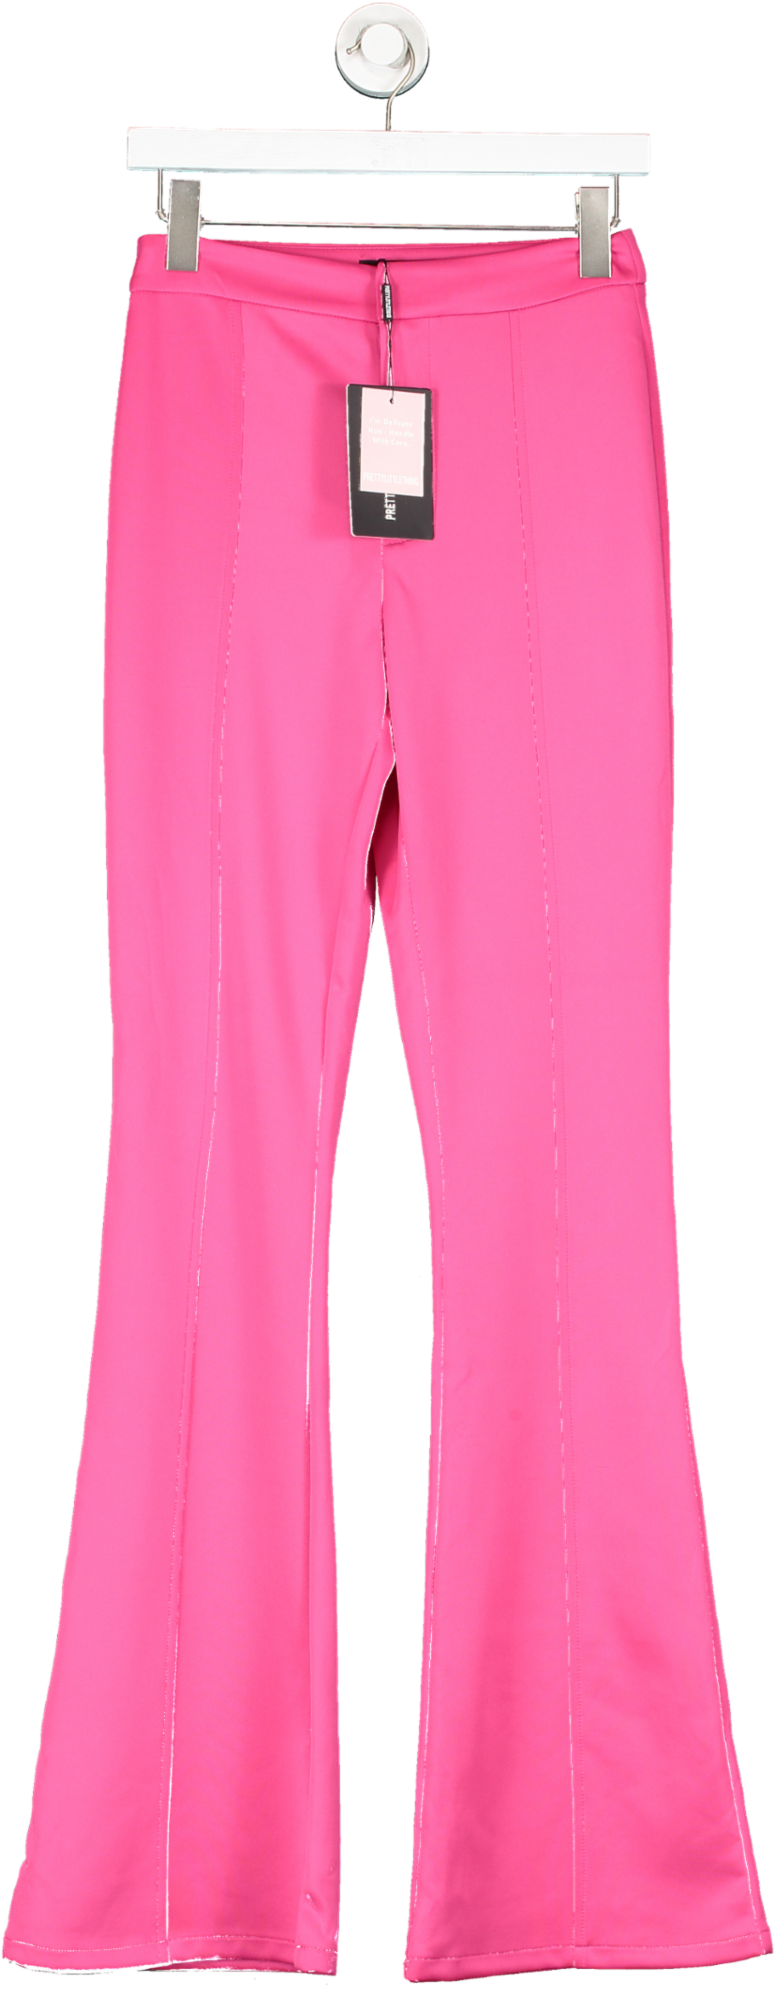 PrettyLittleThing Hot Pink Scuba Flared Trousers UK 6